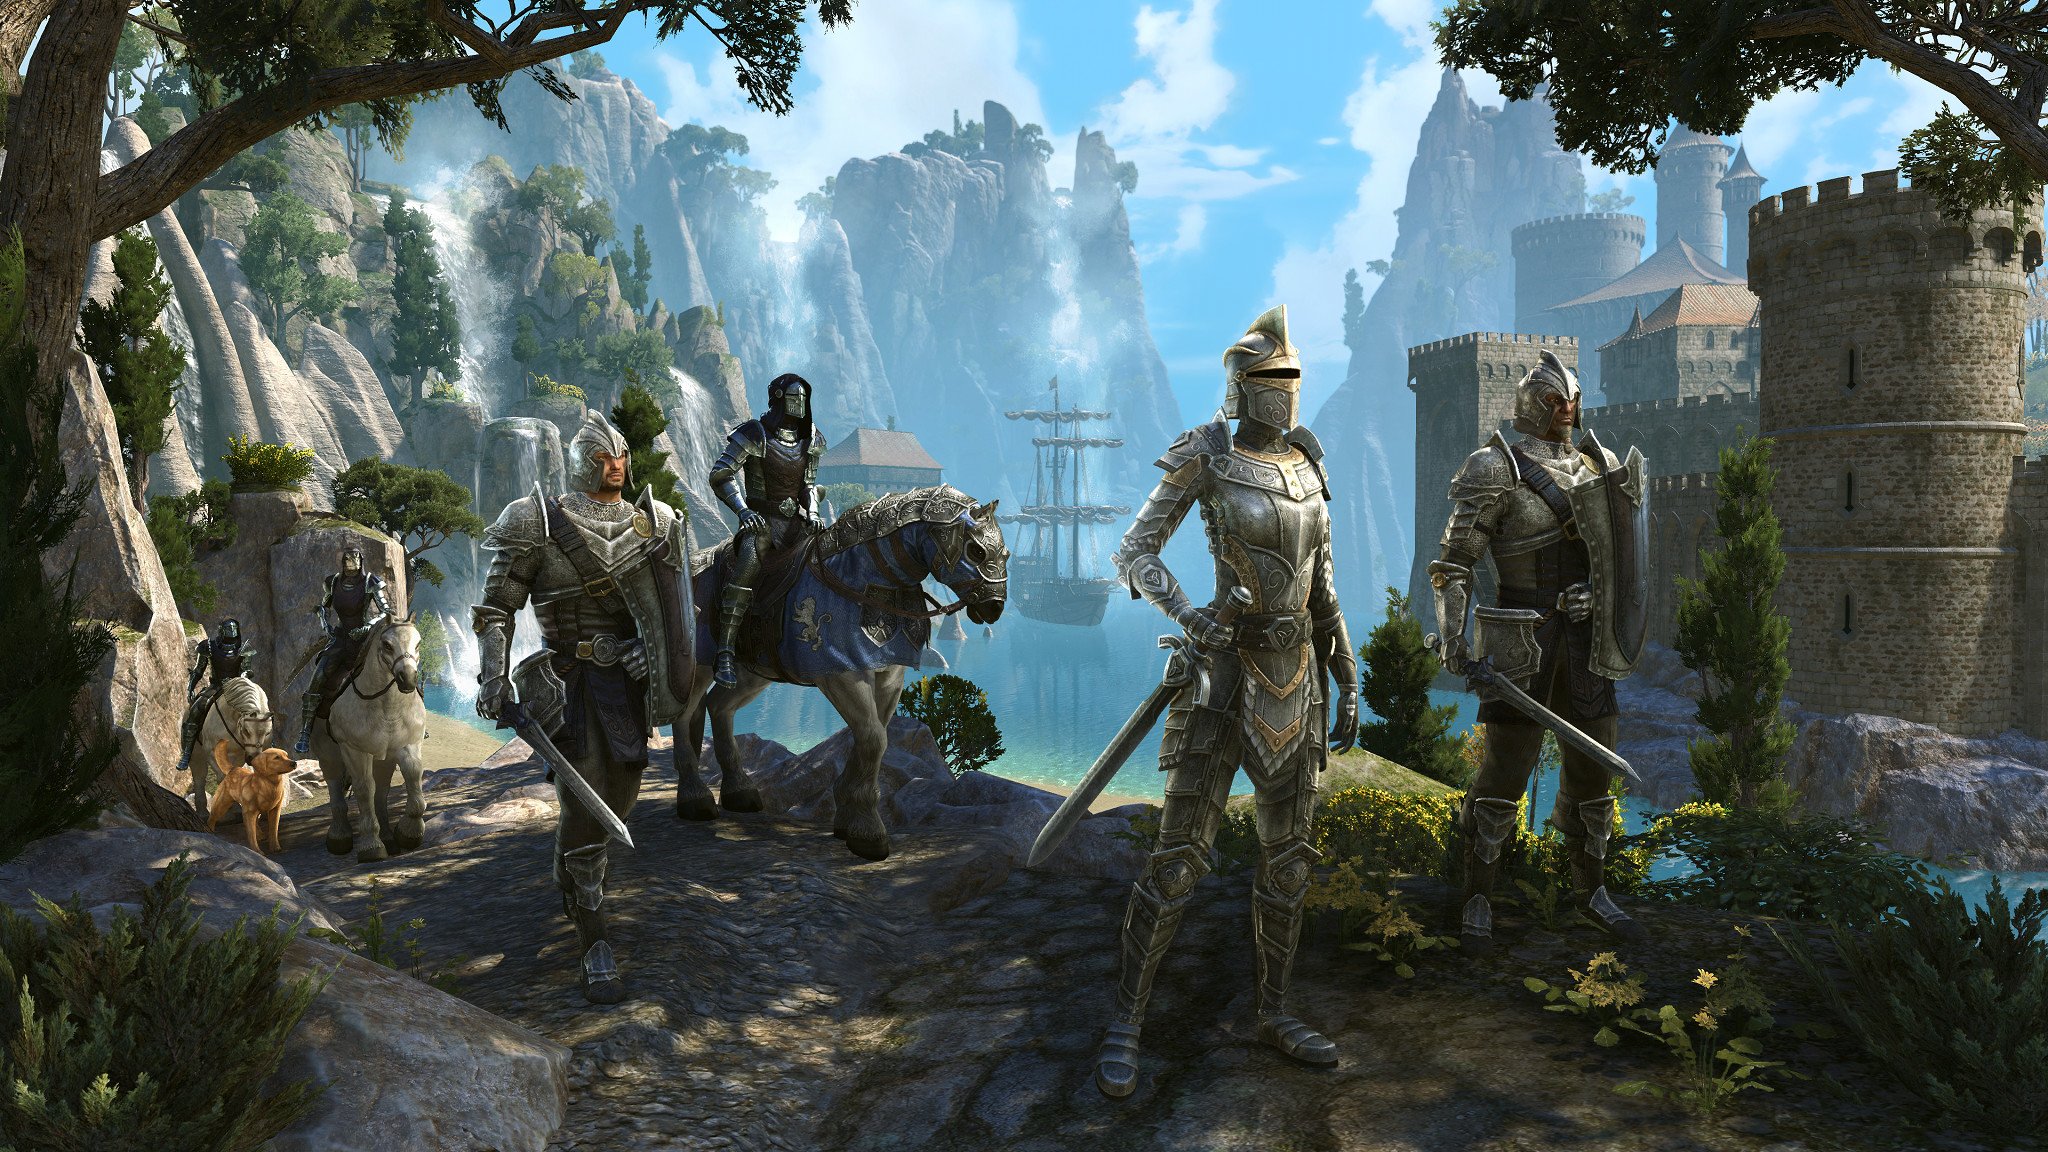 The Elder Scrolls Online: Legacy of the Bretons is the next big adventure